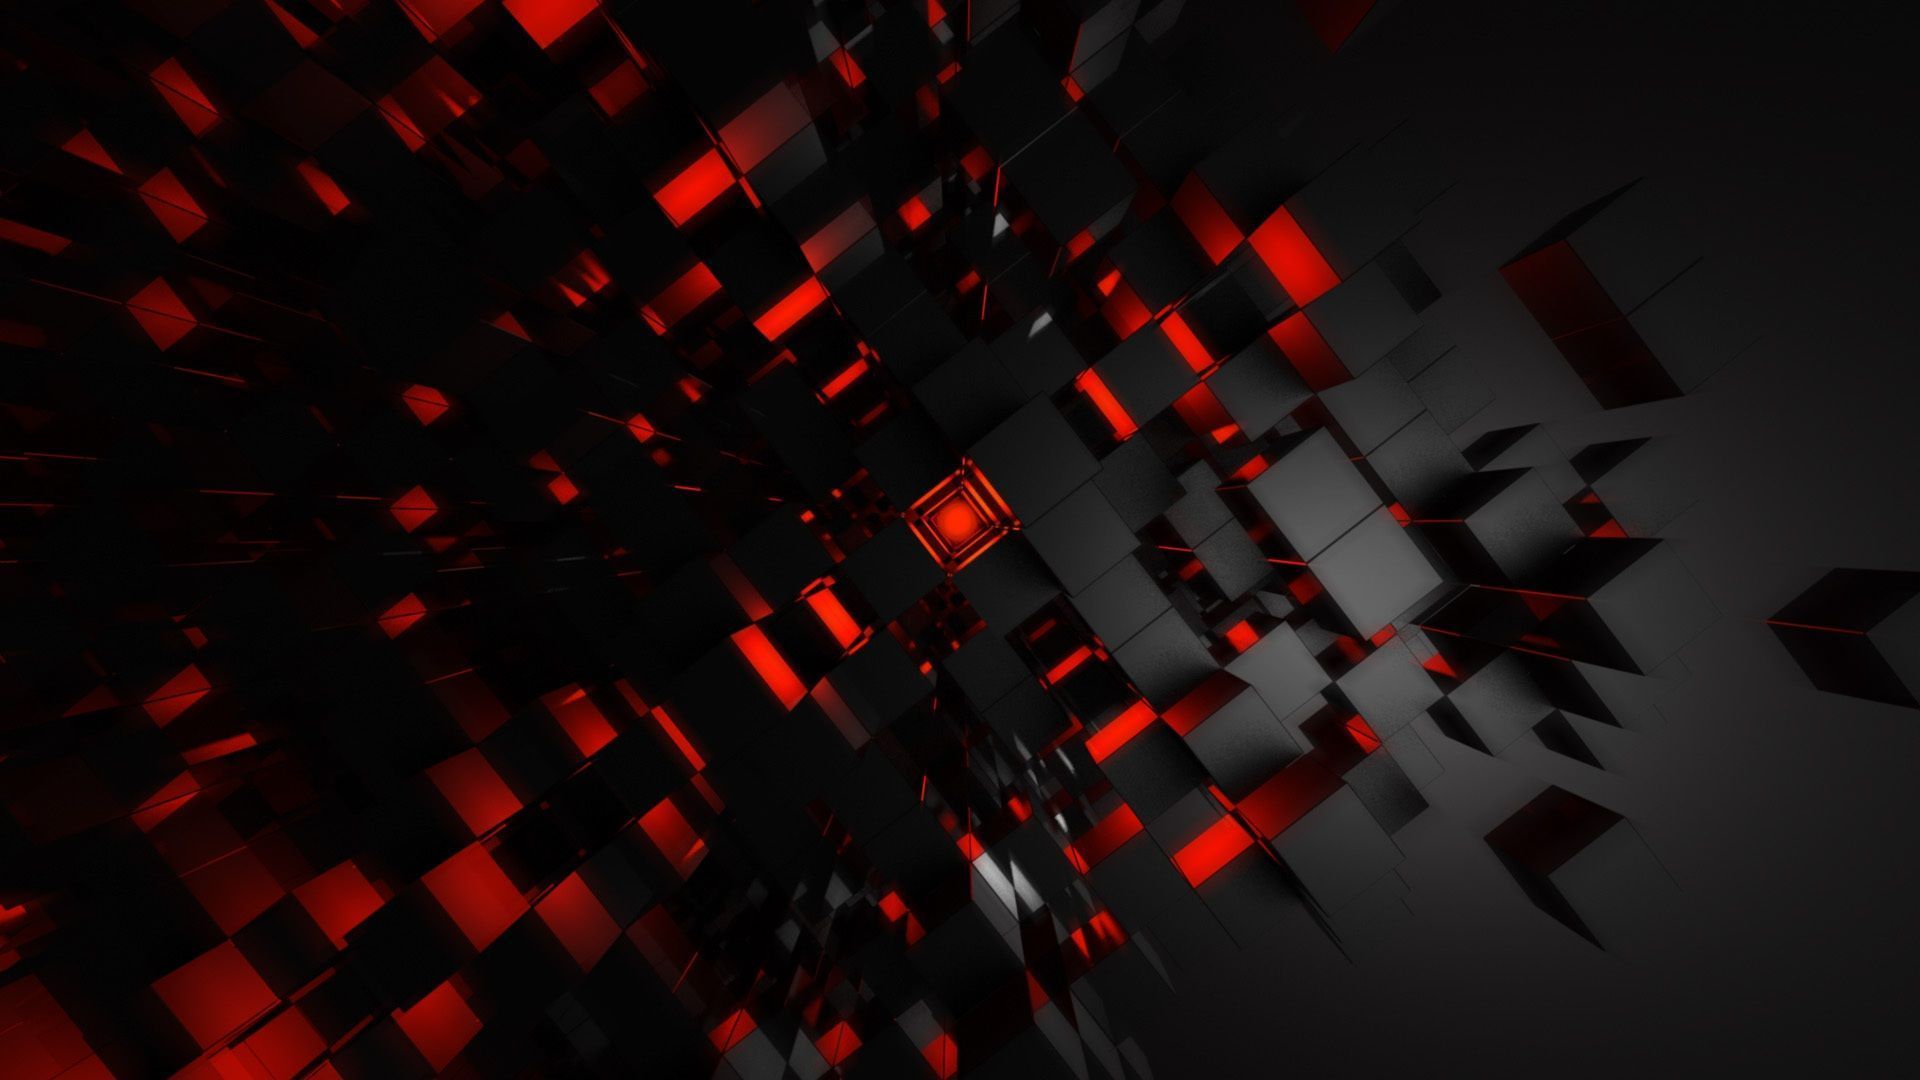 Black And Red Abstract Wallpaper 21 - [1920x1080]